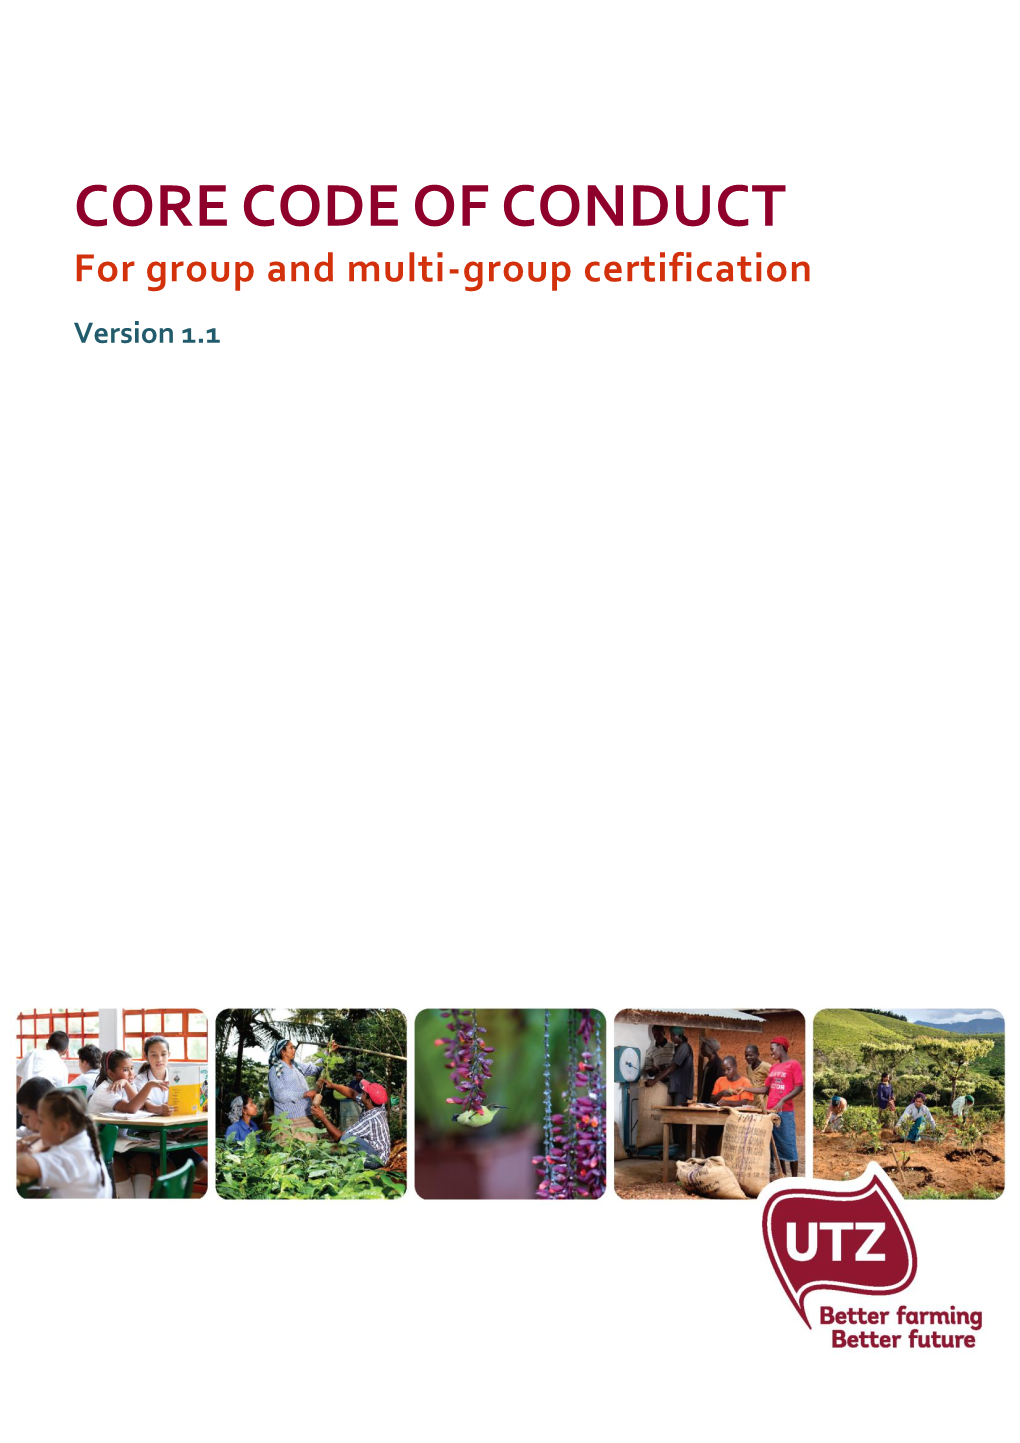 CORE CODE of CONDUCT for Group and Multi-Group Certification